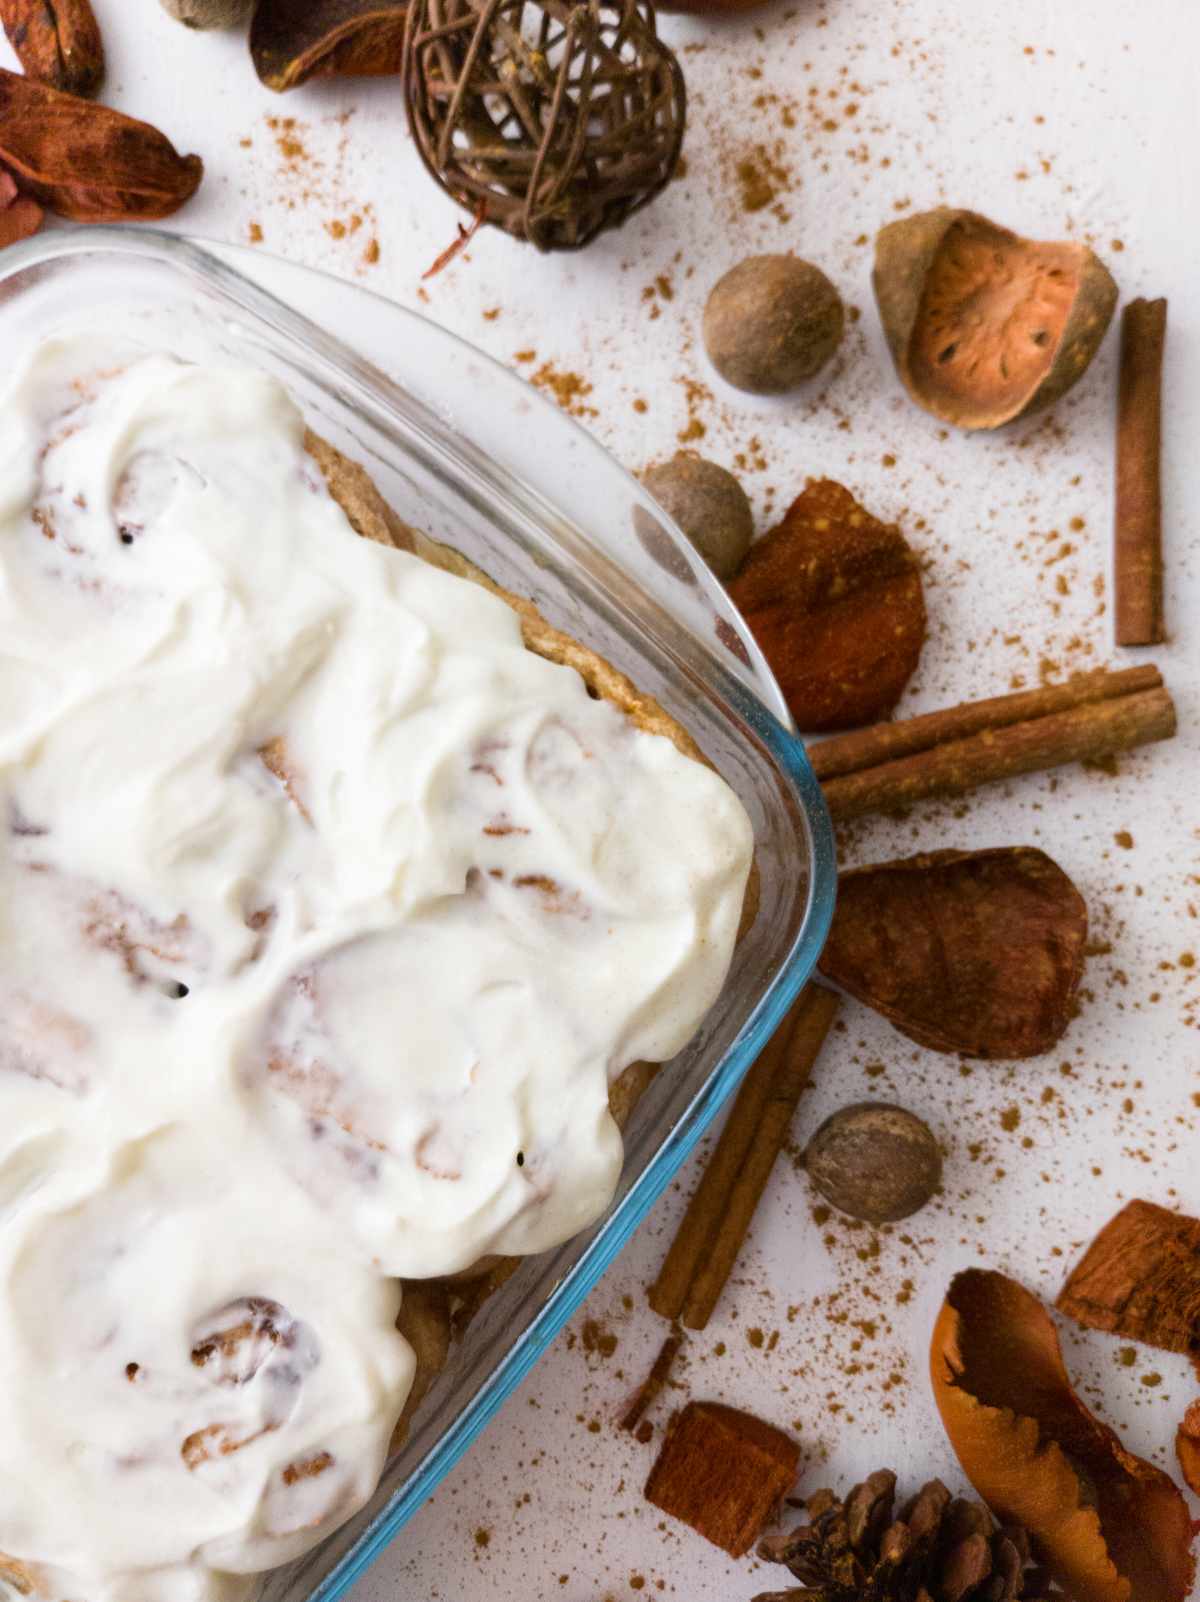 Gluten-free sourdough cinnamon rolls in a dish with frosting.